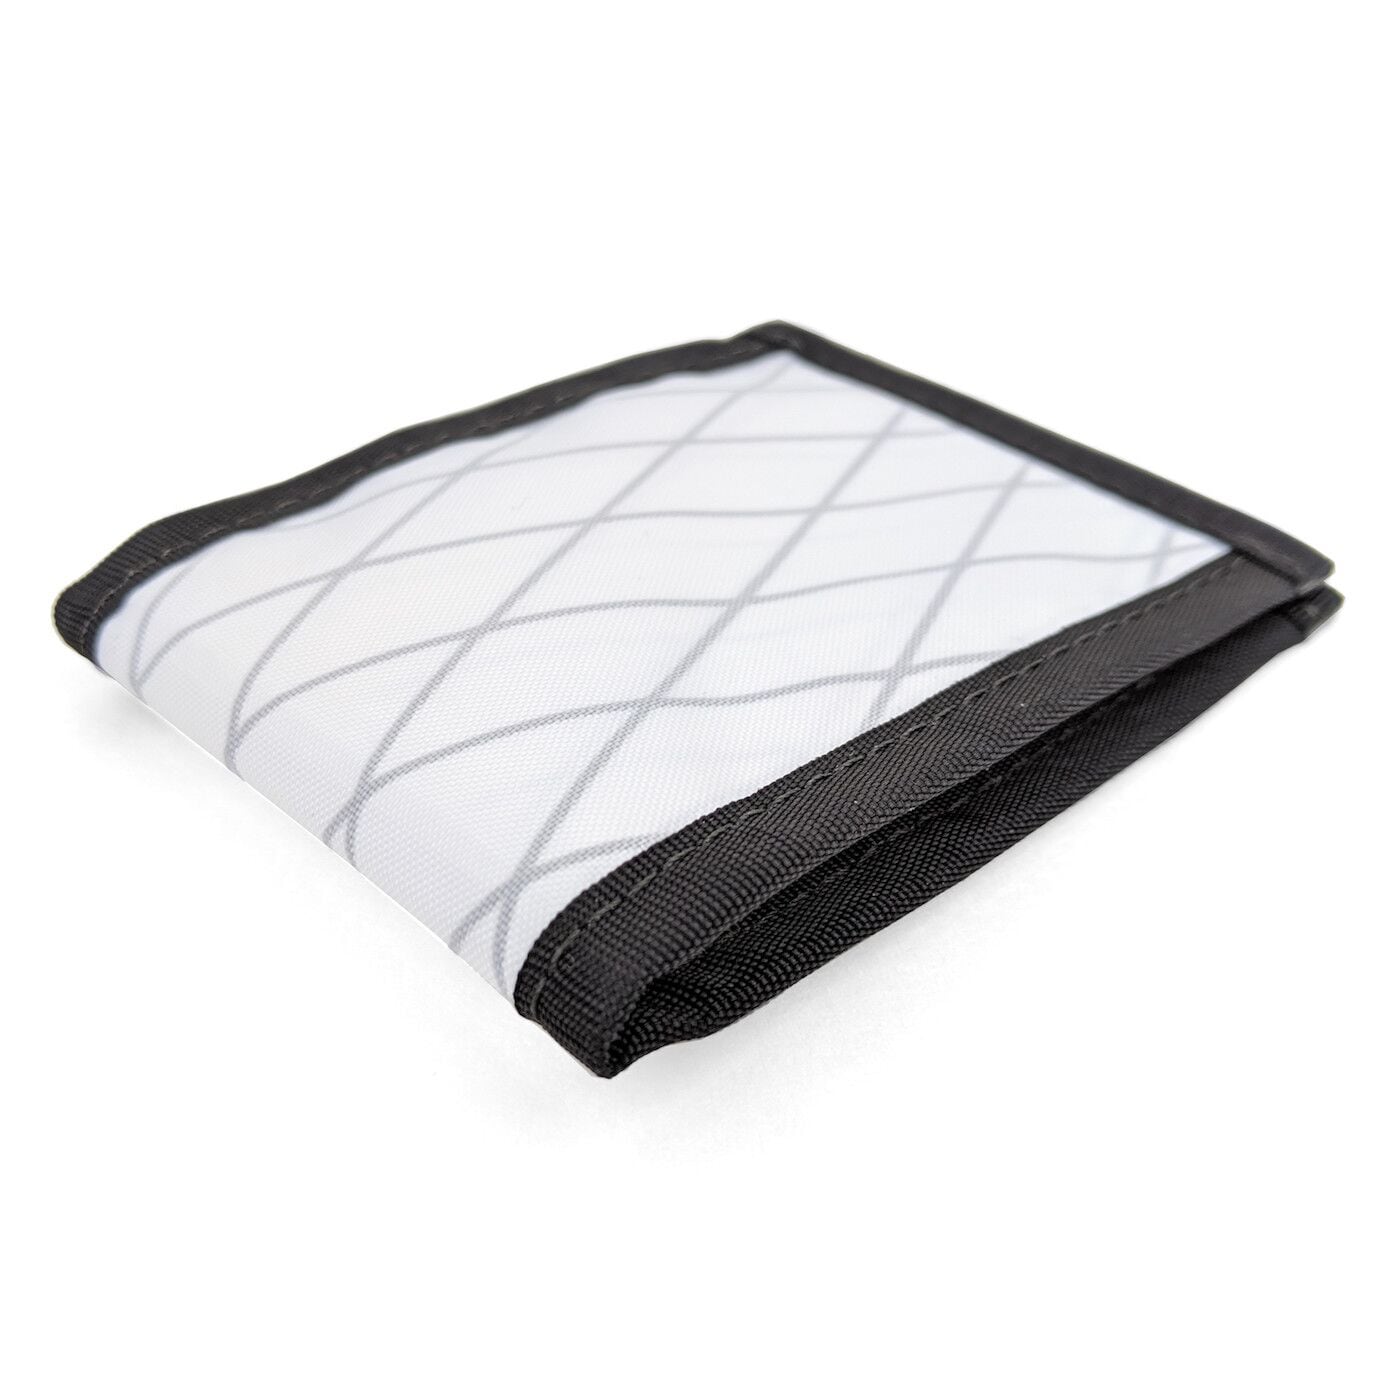 Flowfold Custom Vanguard Bifold Minimalist Wallet side view shown in White fabric but fully customizable 